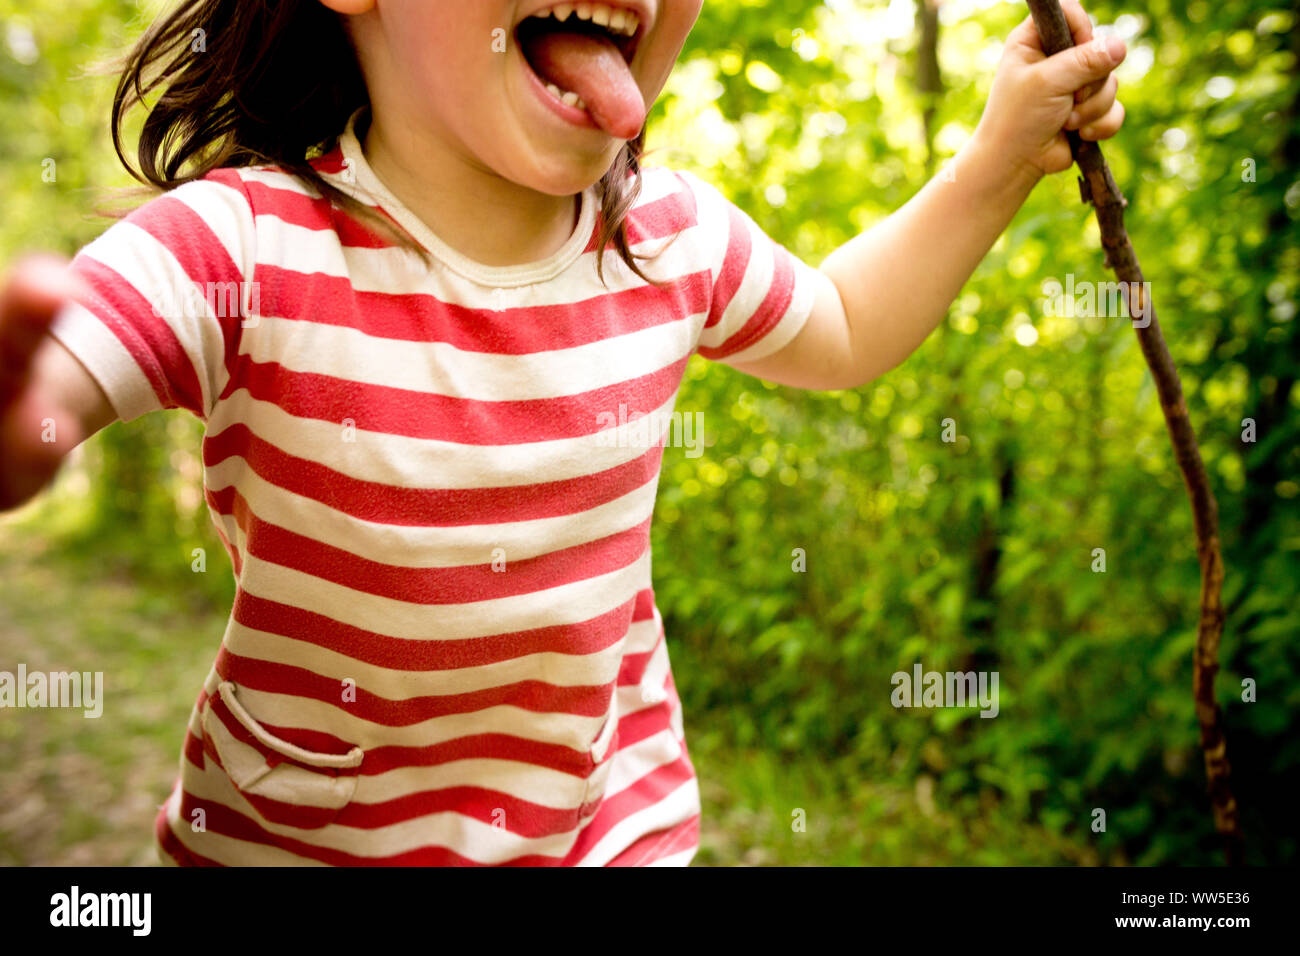 4-6 years old child with striped shirt and stick in the hand running through the forest, close-up, detail, Stock Photo